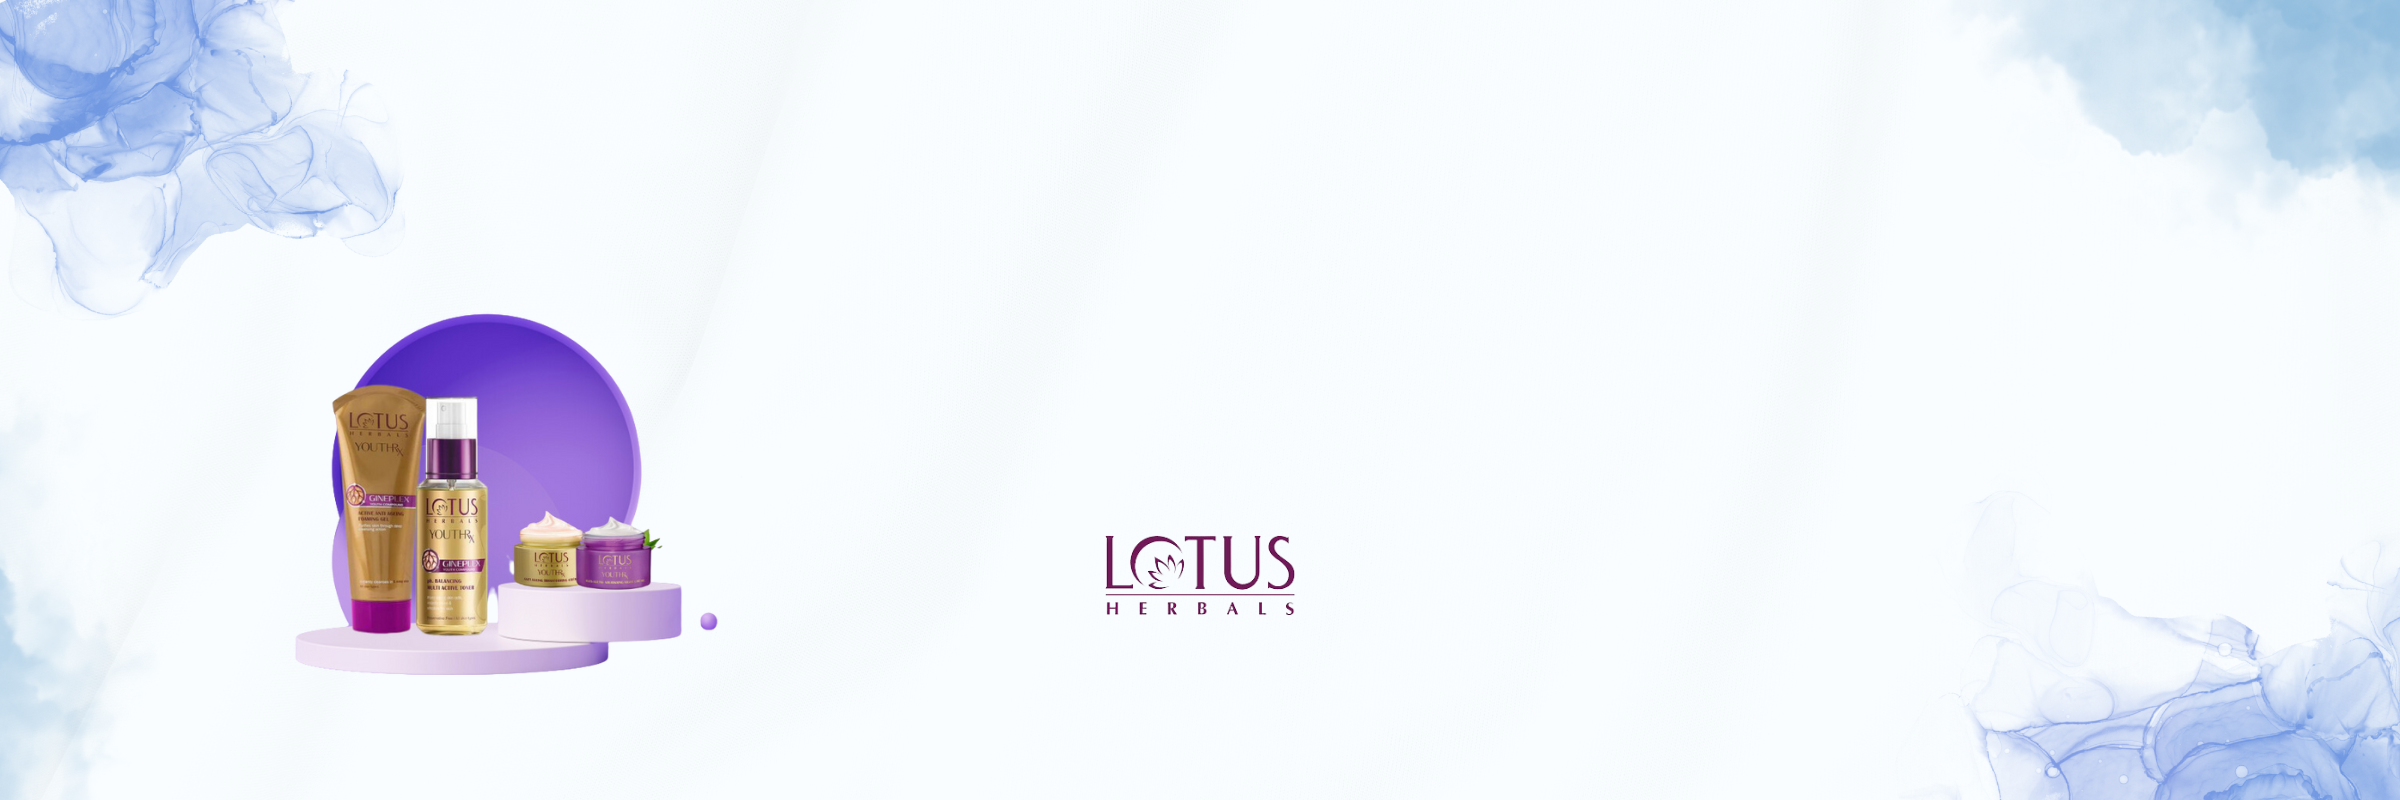 lotus herbals youthrx firm and bright regimen banner